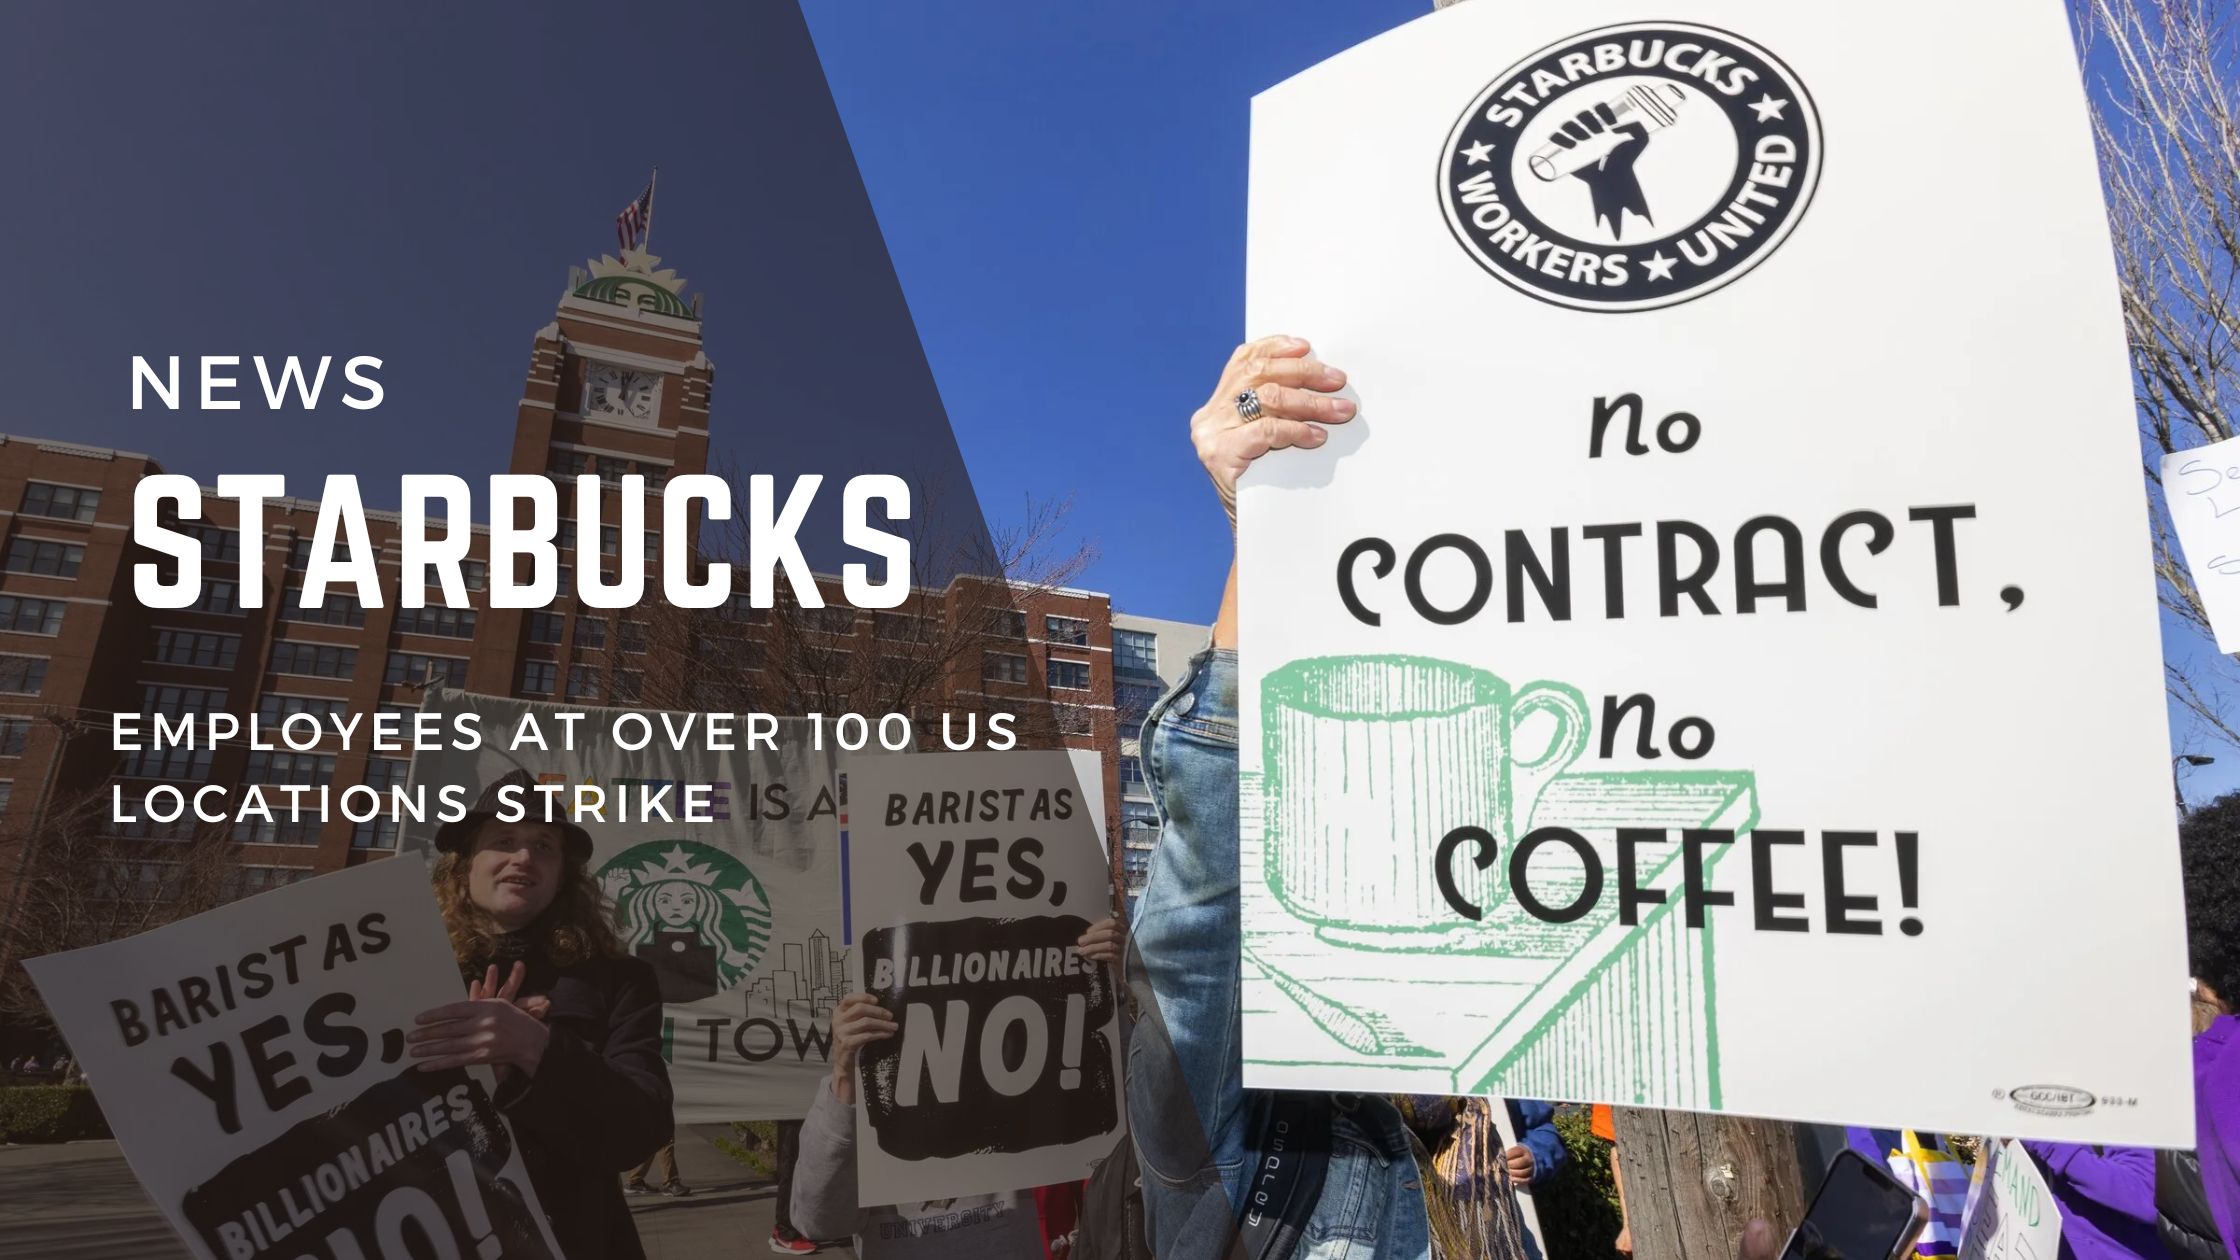 Starbucks employees at over 100 US locations strike before the shareholder meeting